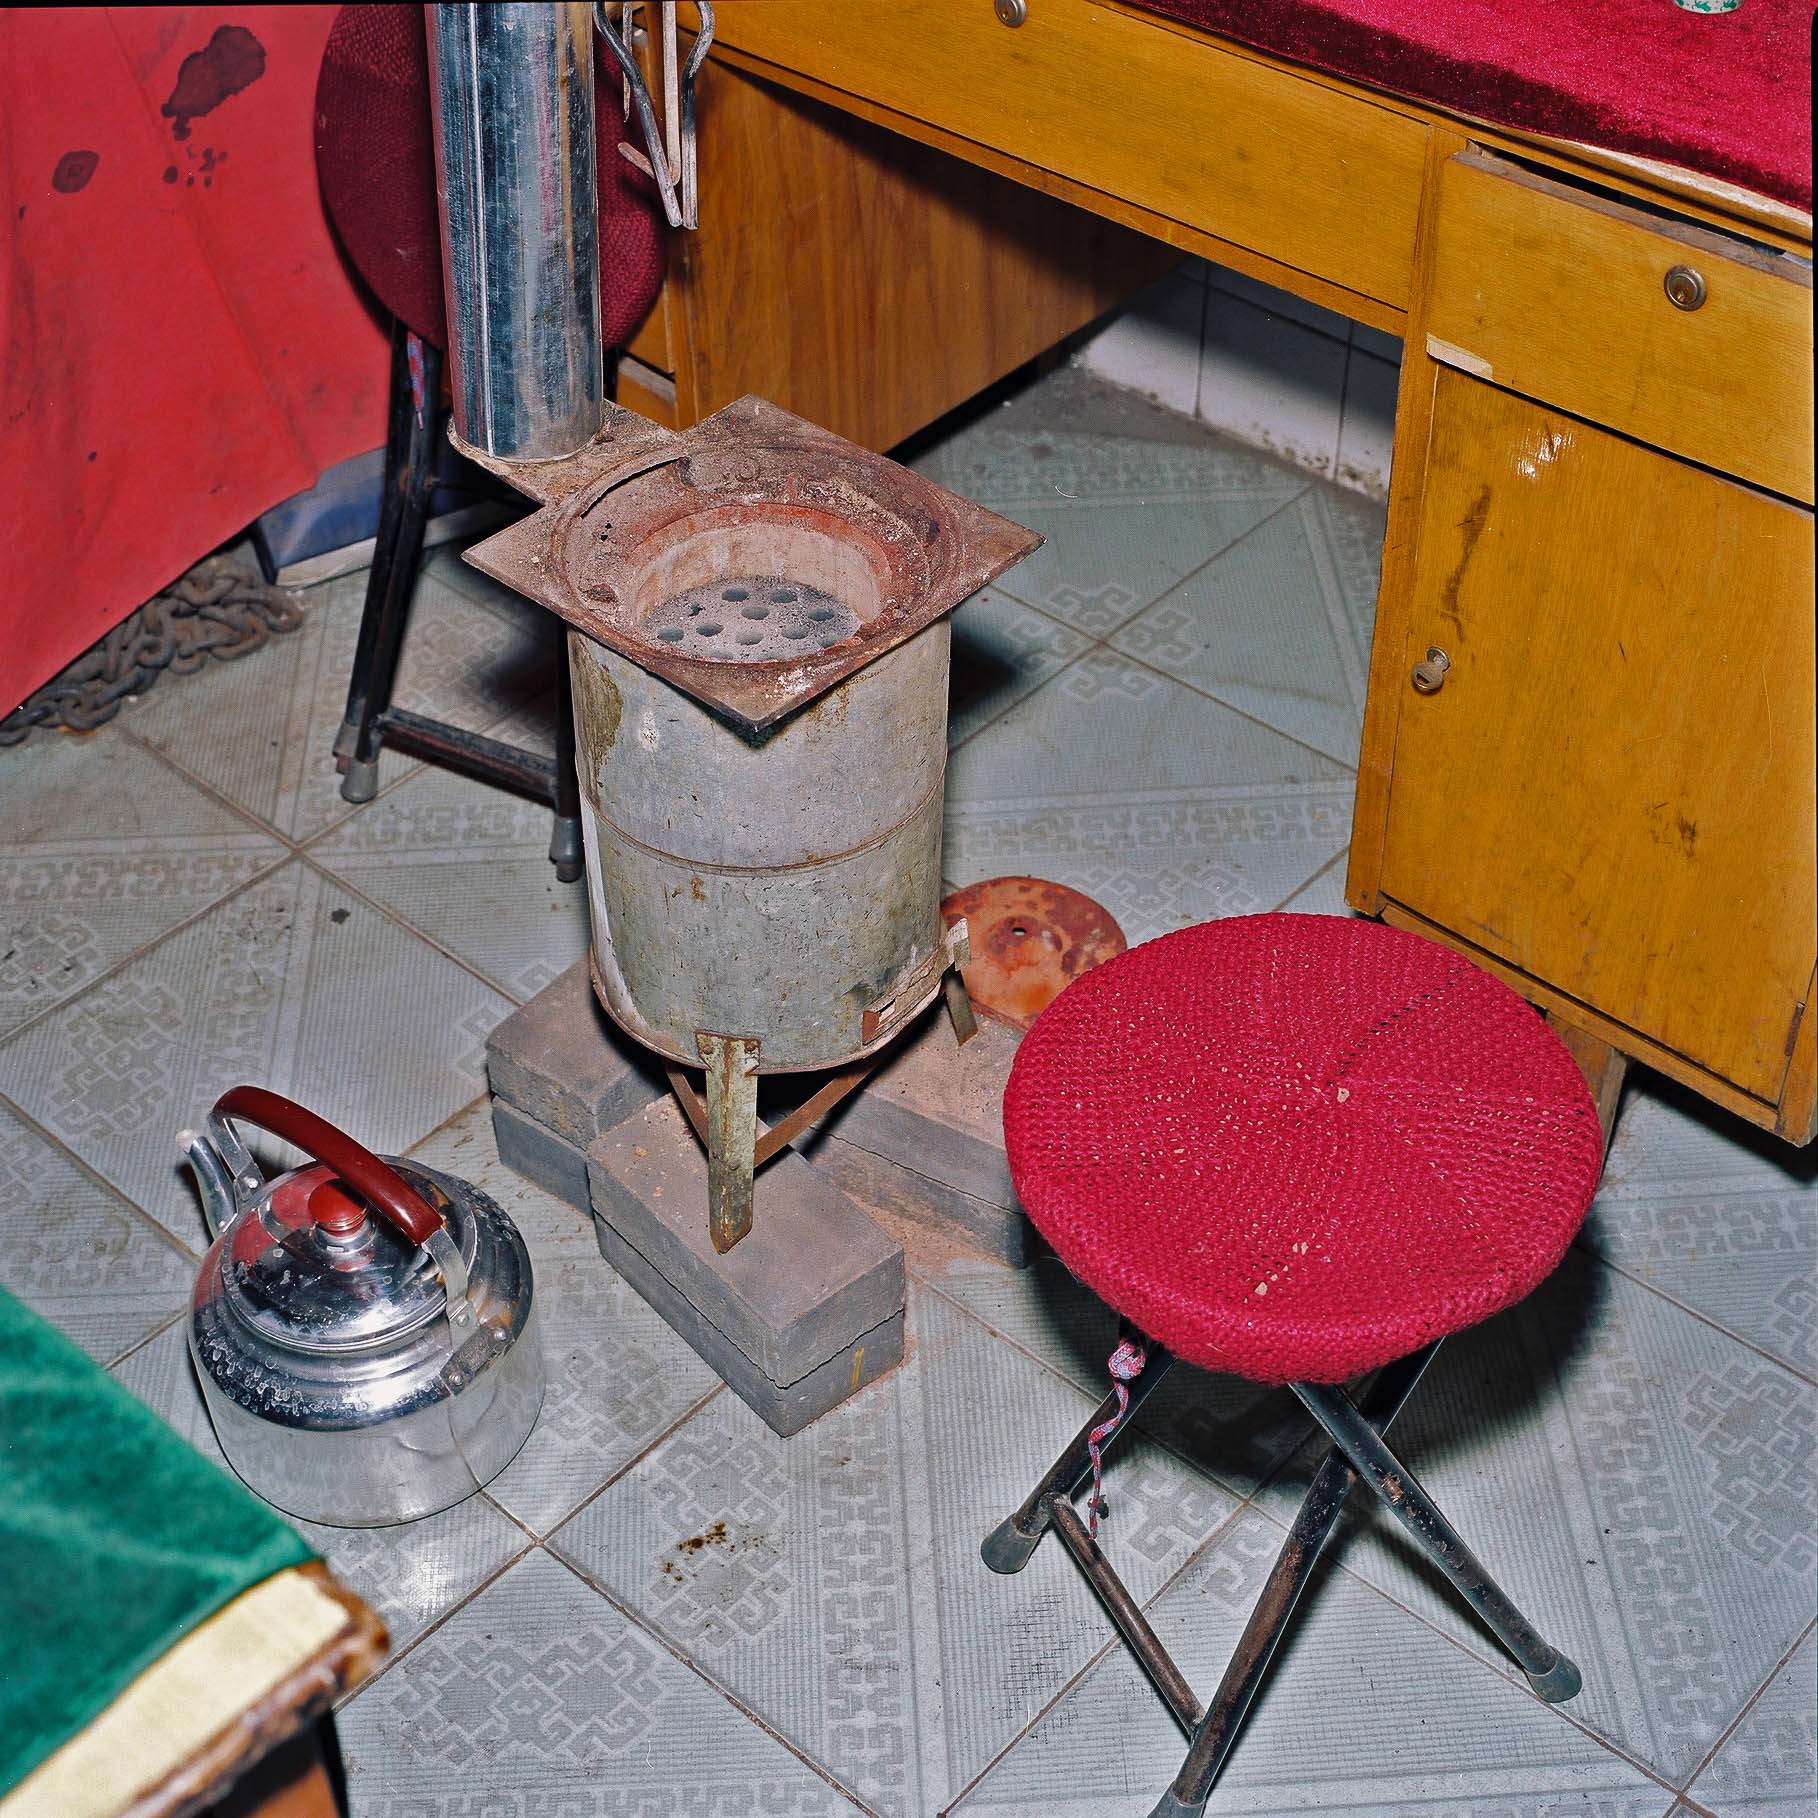 A tri-pod chair with a red crochet covering in front of a coal burner.